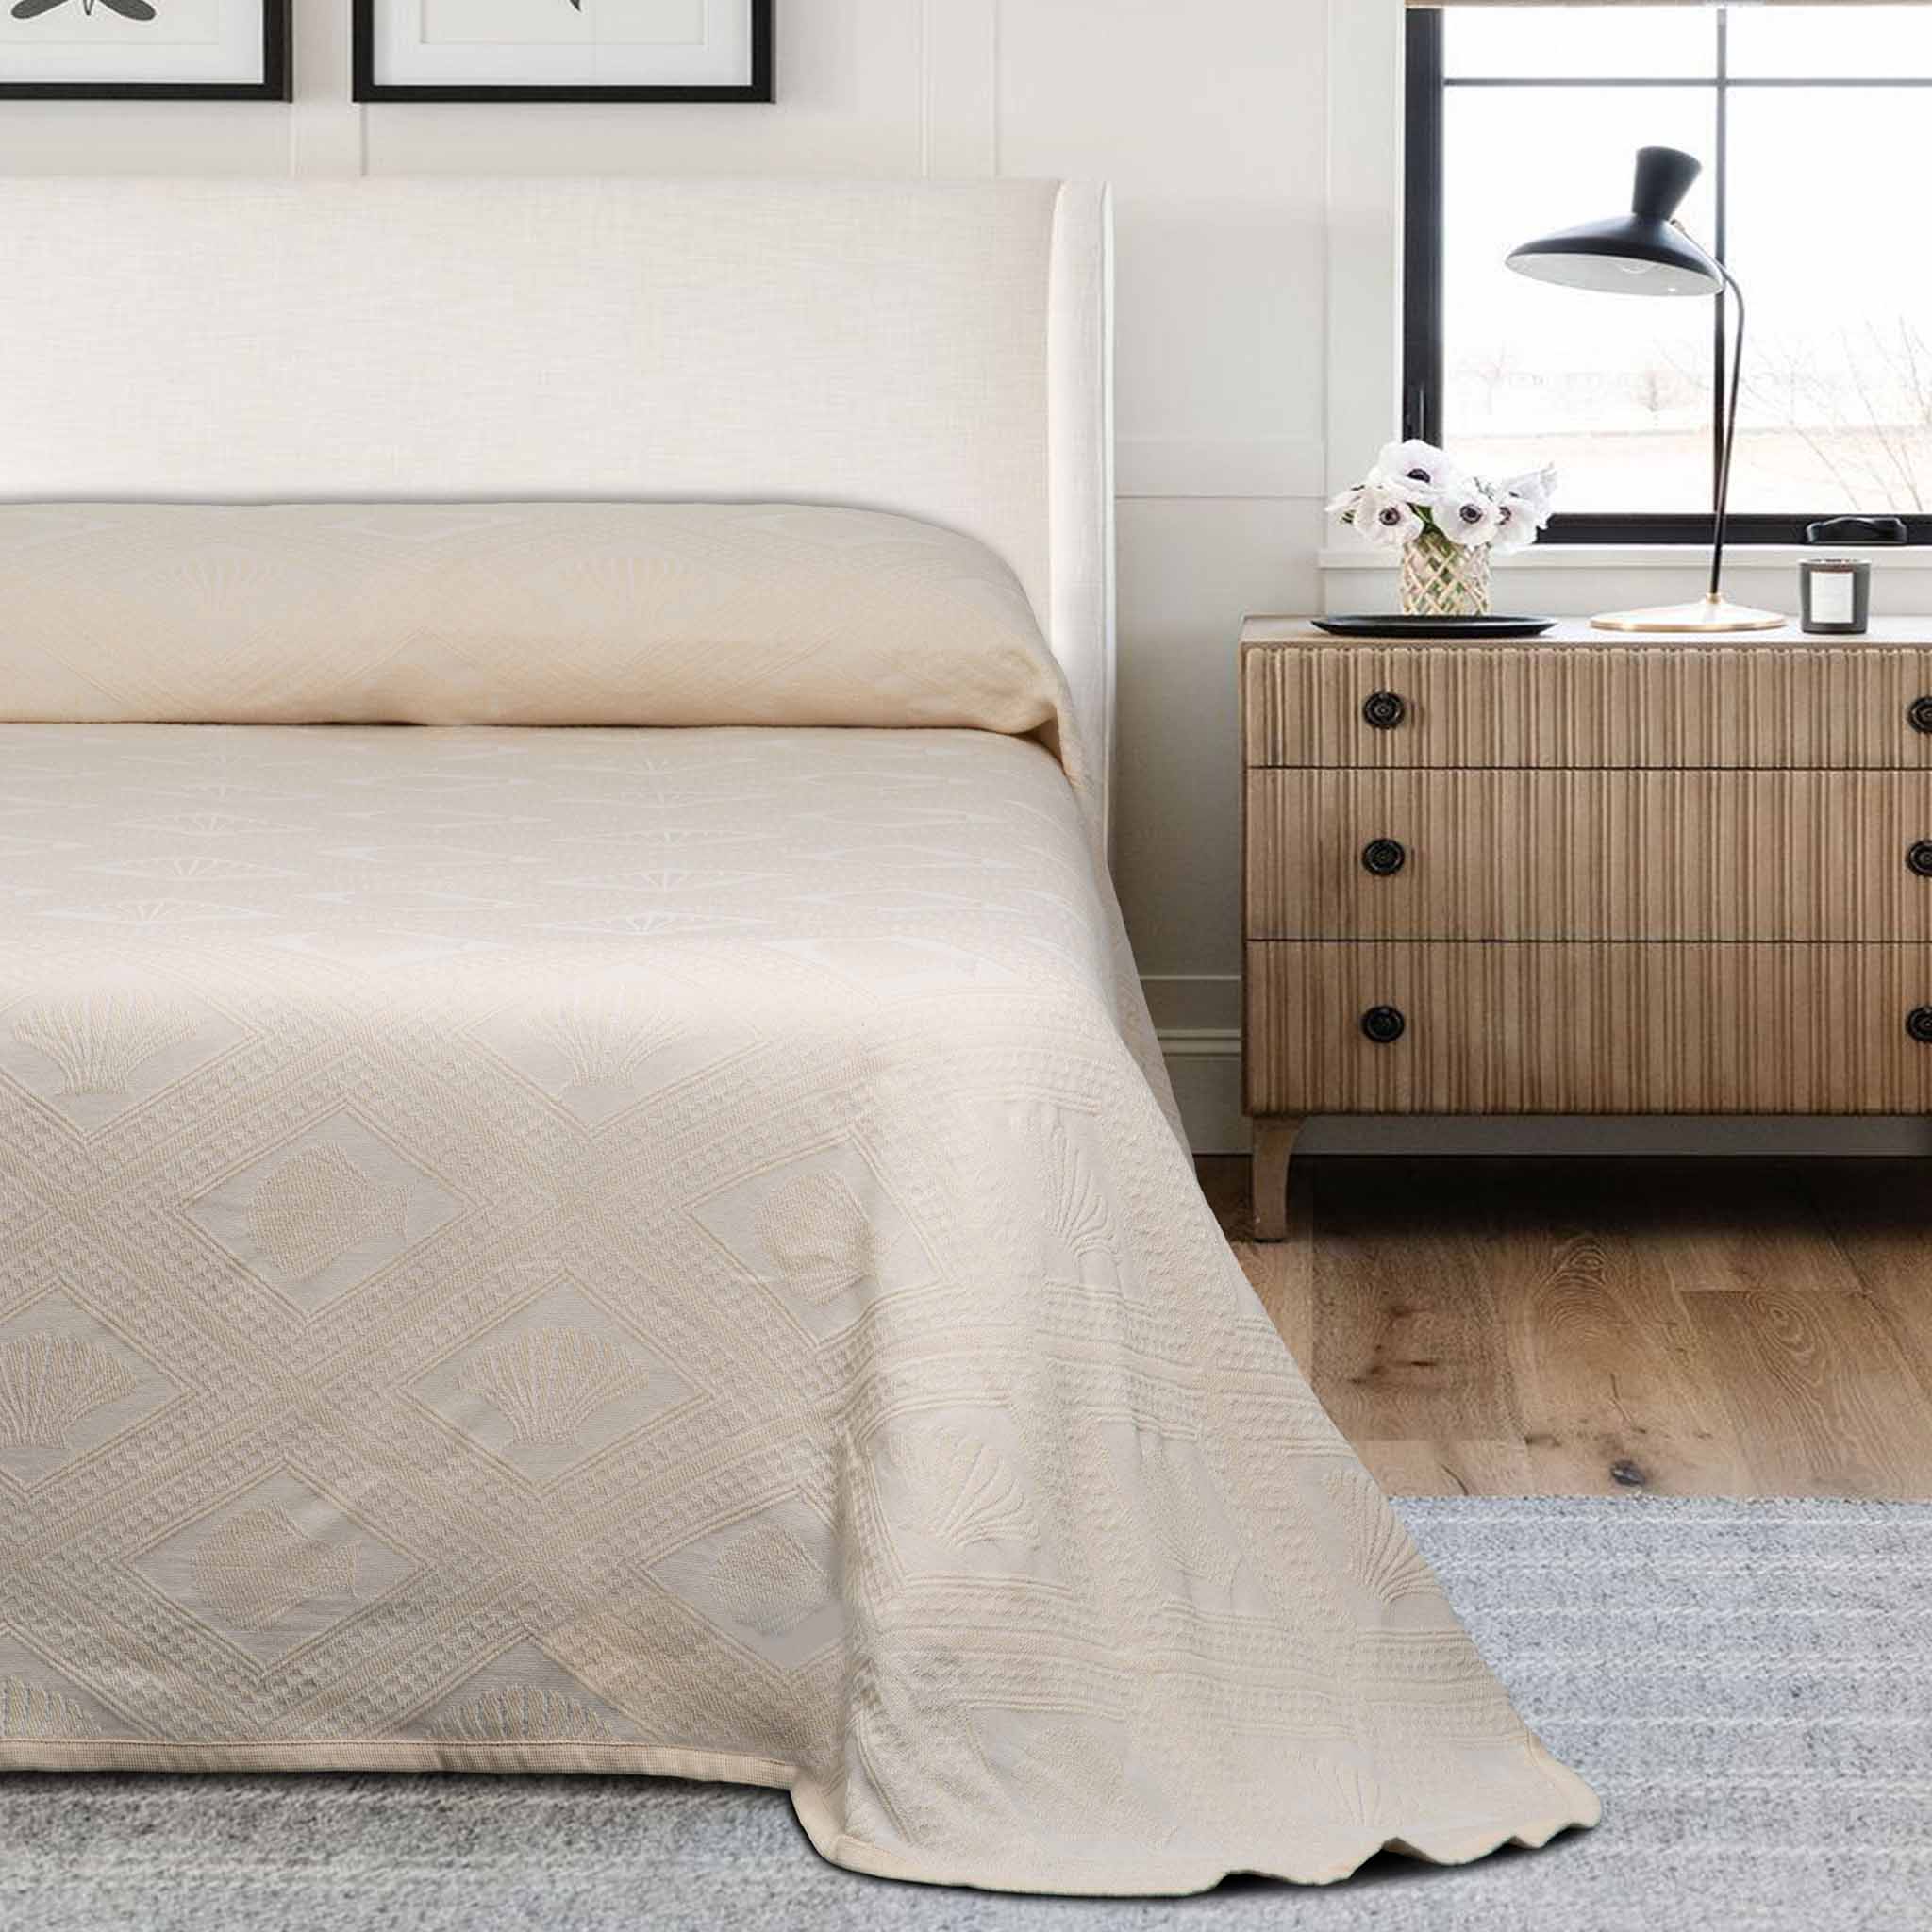 Avalon Jacquard Bedspreads by Bargoose Home Textiles Jacquard Bedspreads Bargoose Home Textiles, Inc. 